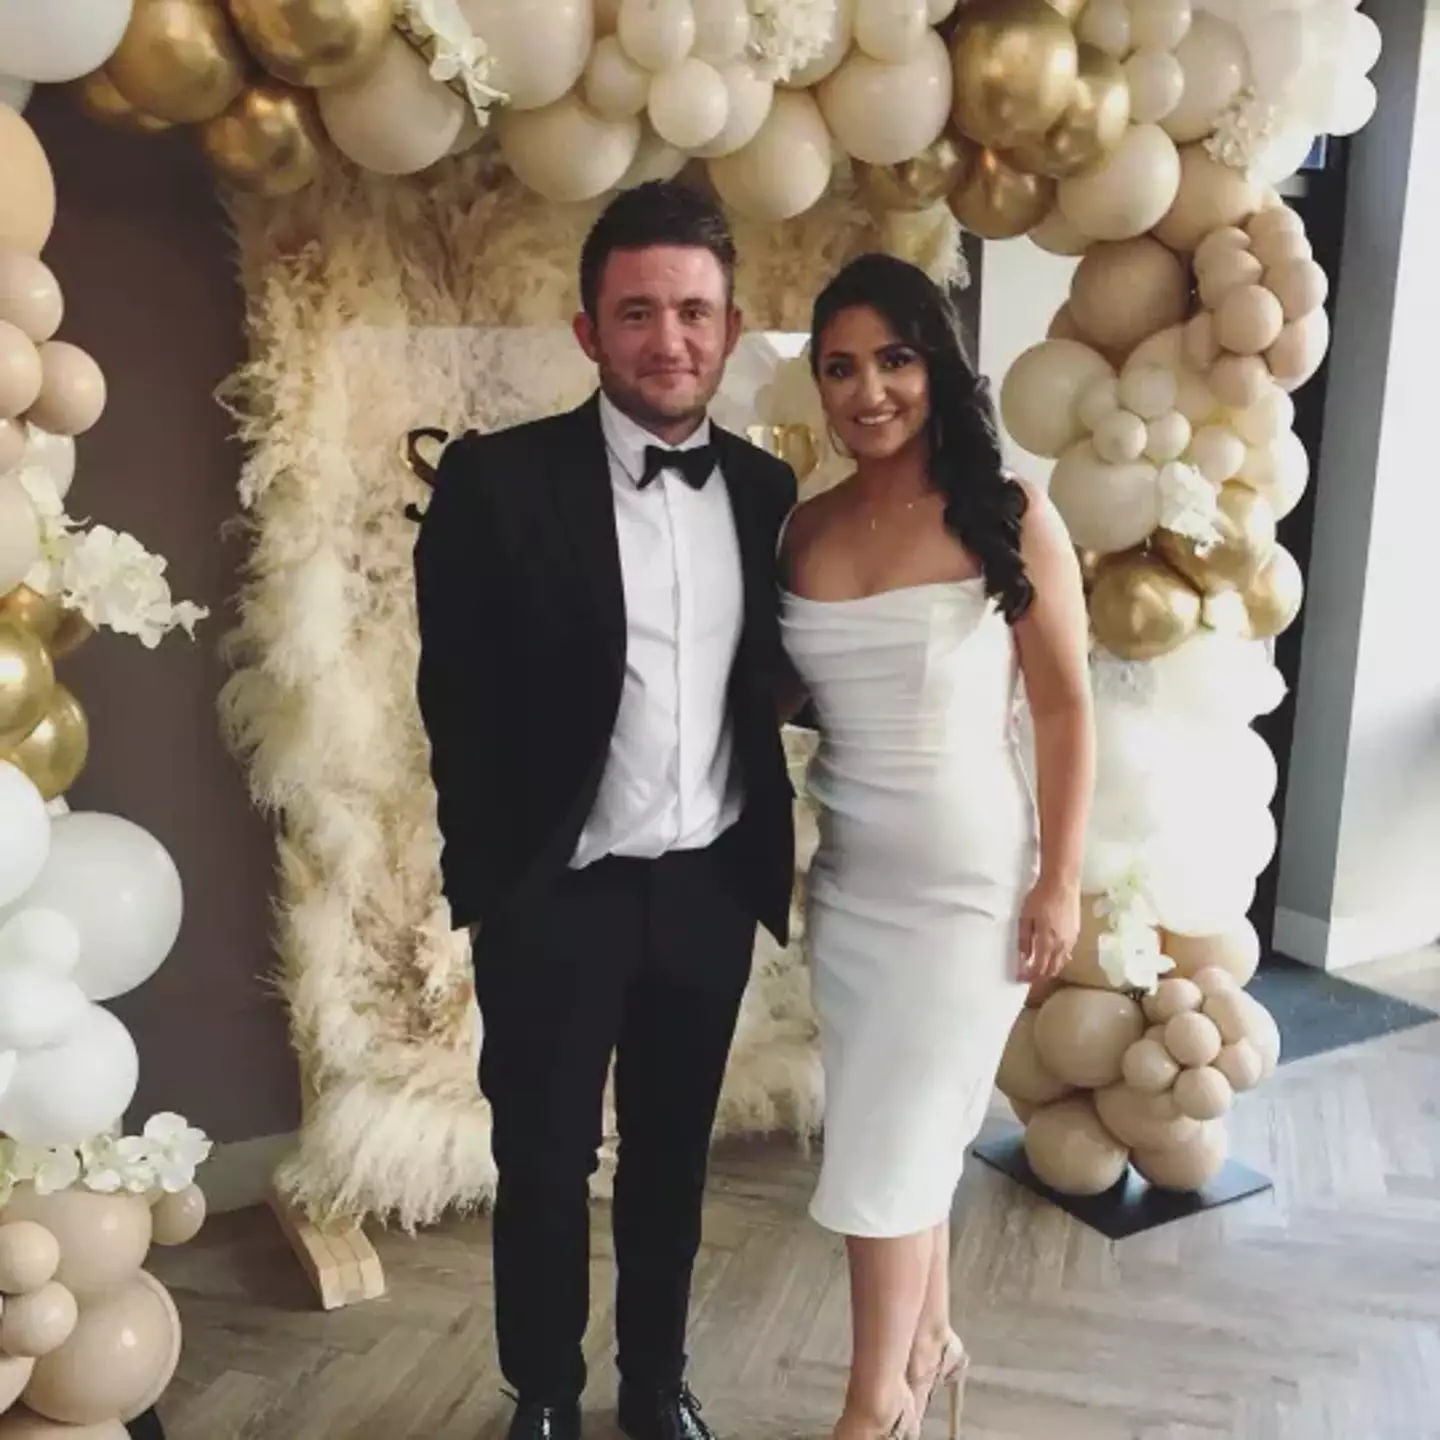 Reports claim that Shane Nolan and Maddie Wahdan have split up.